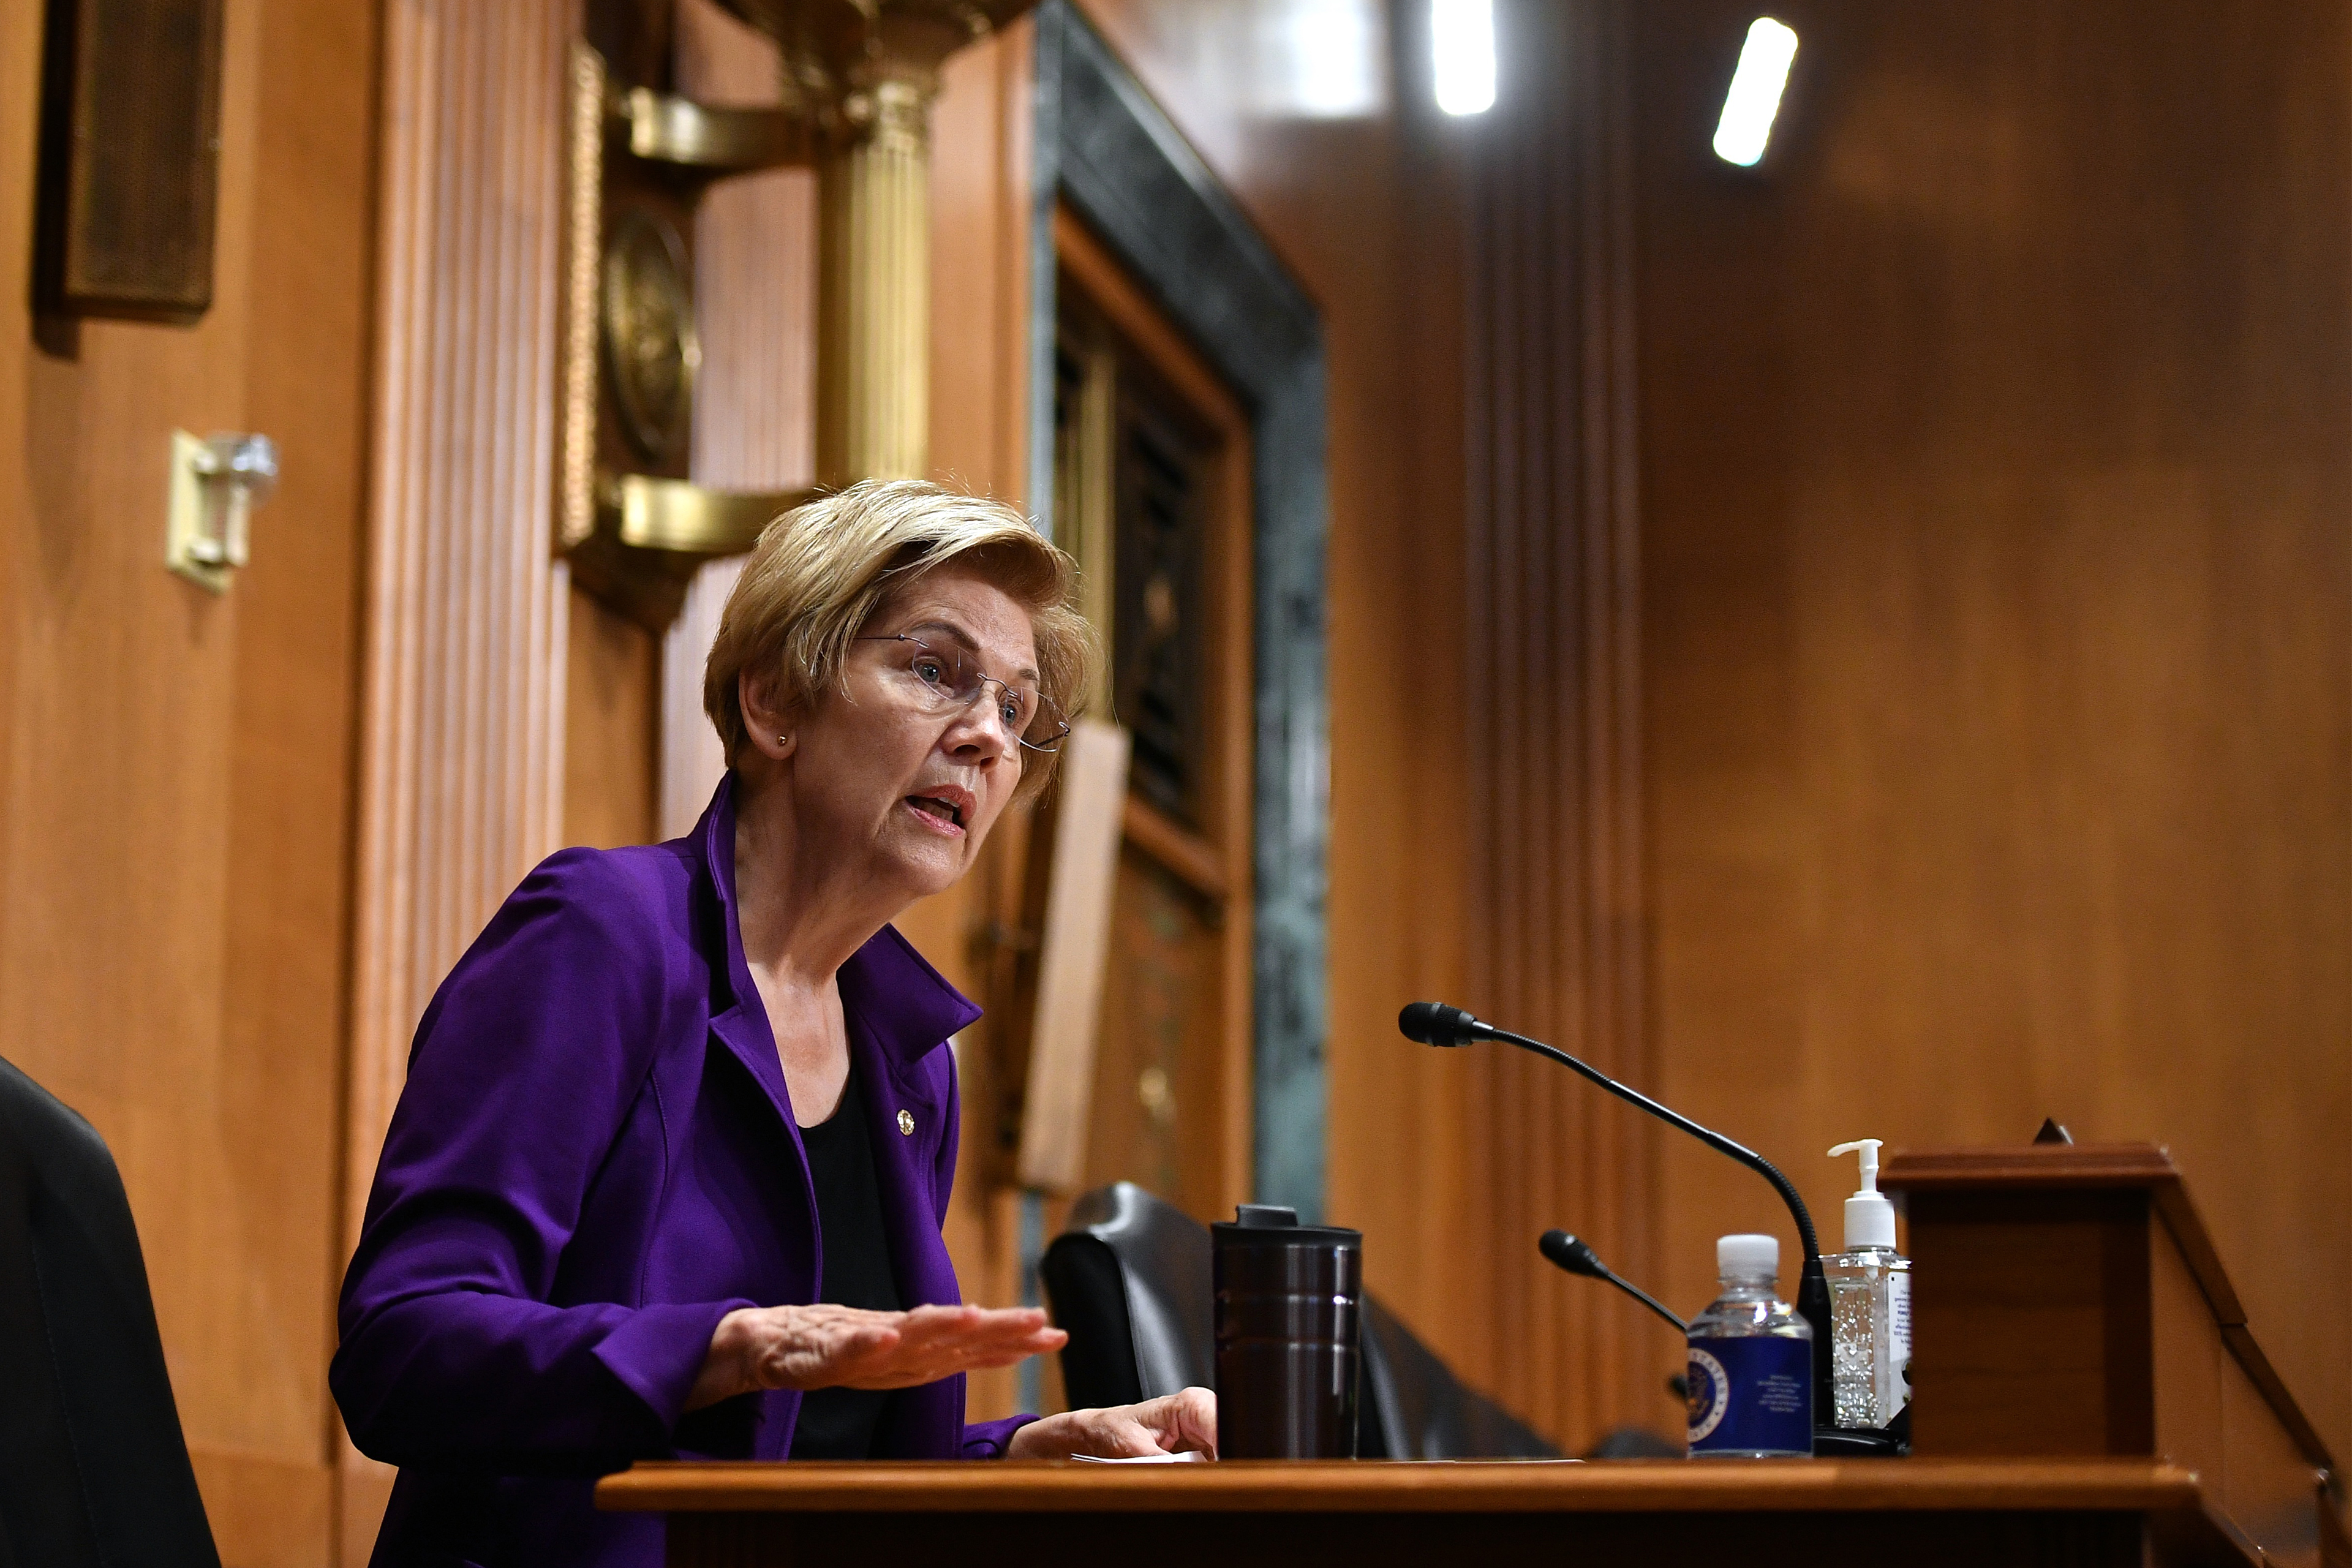 Sen. Elizabeth Warren is seen facing to the right, speaking into a microphone during a Senate Finance Committee hearing.